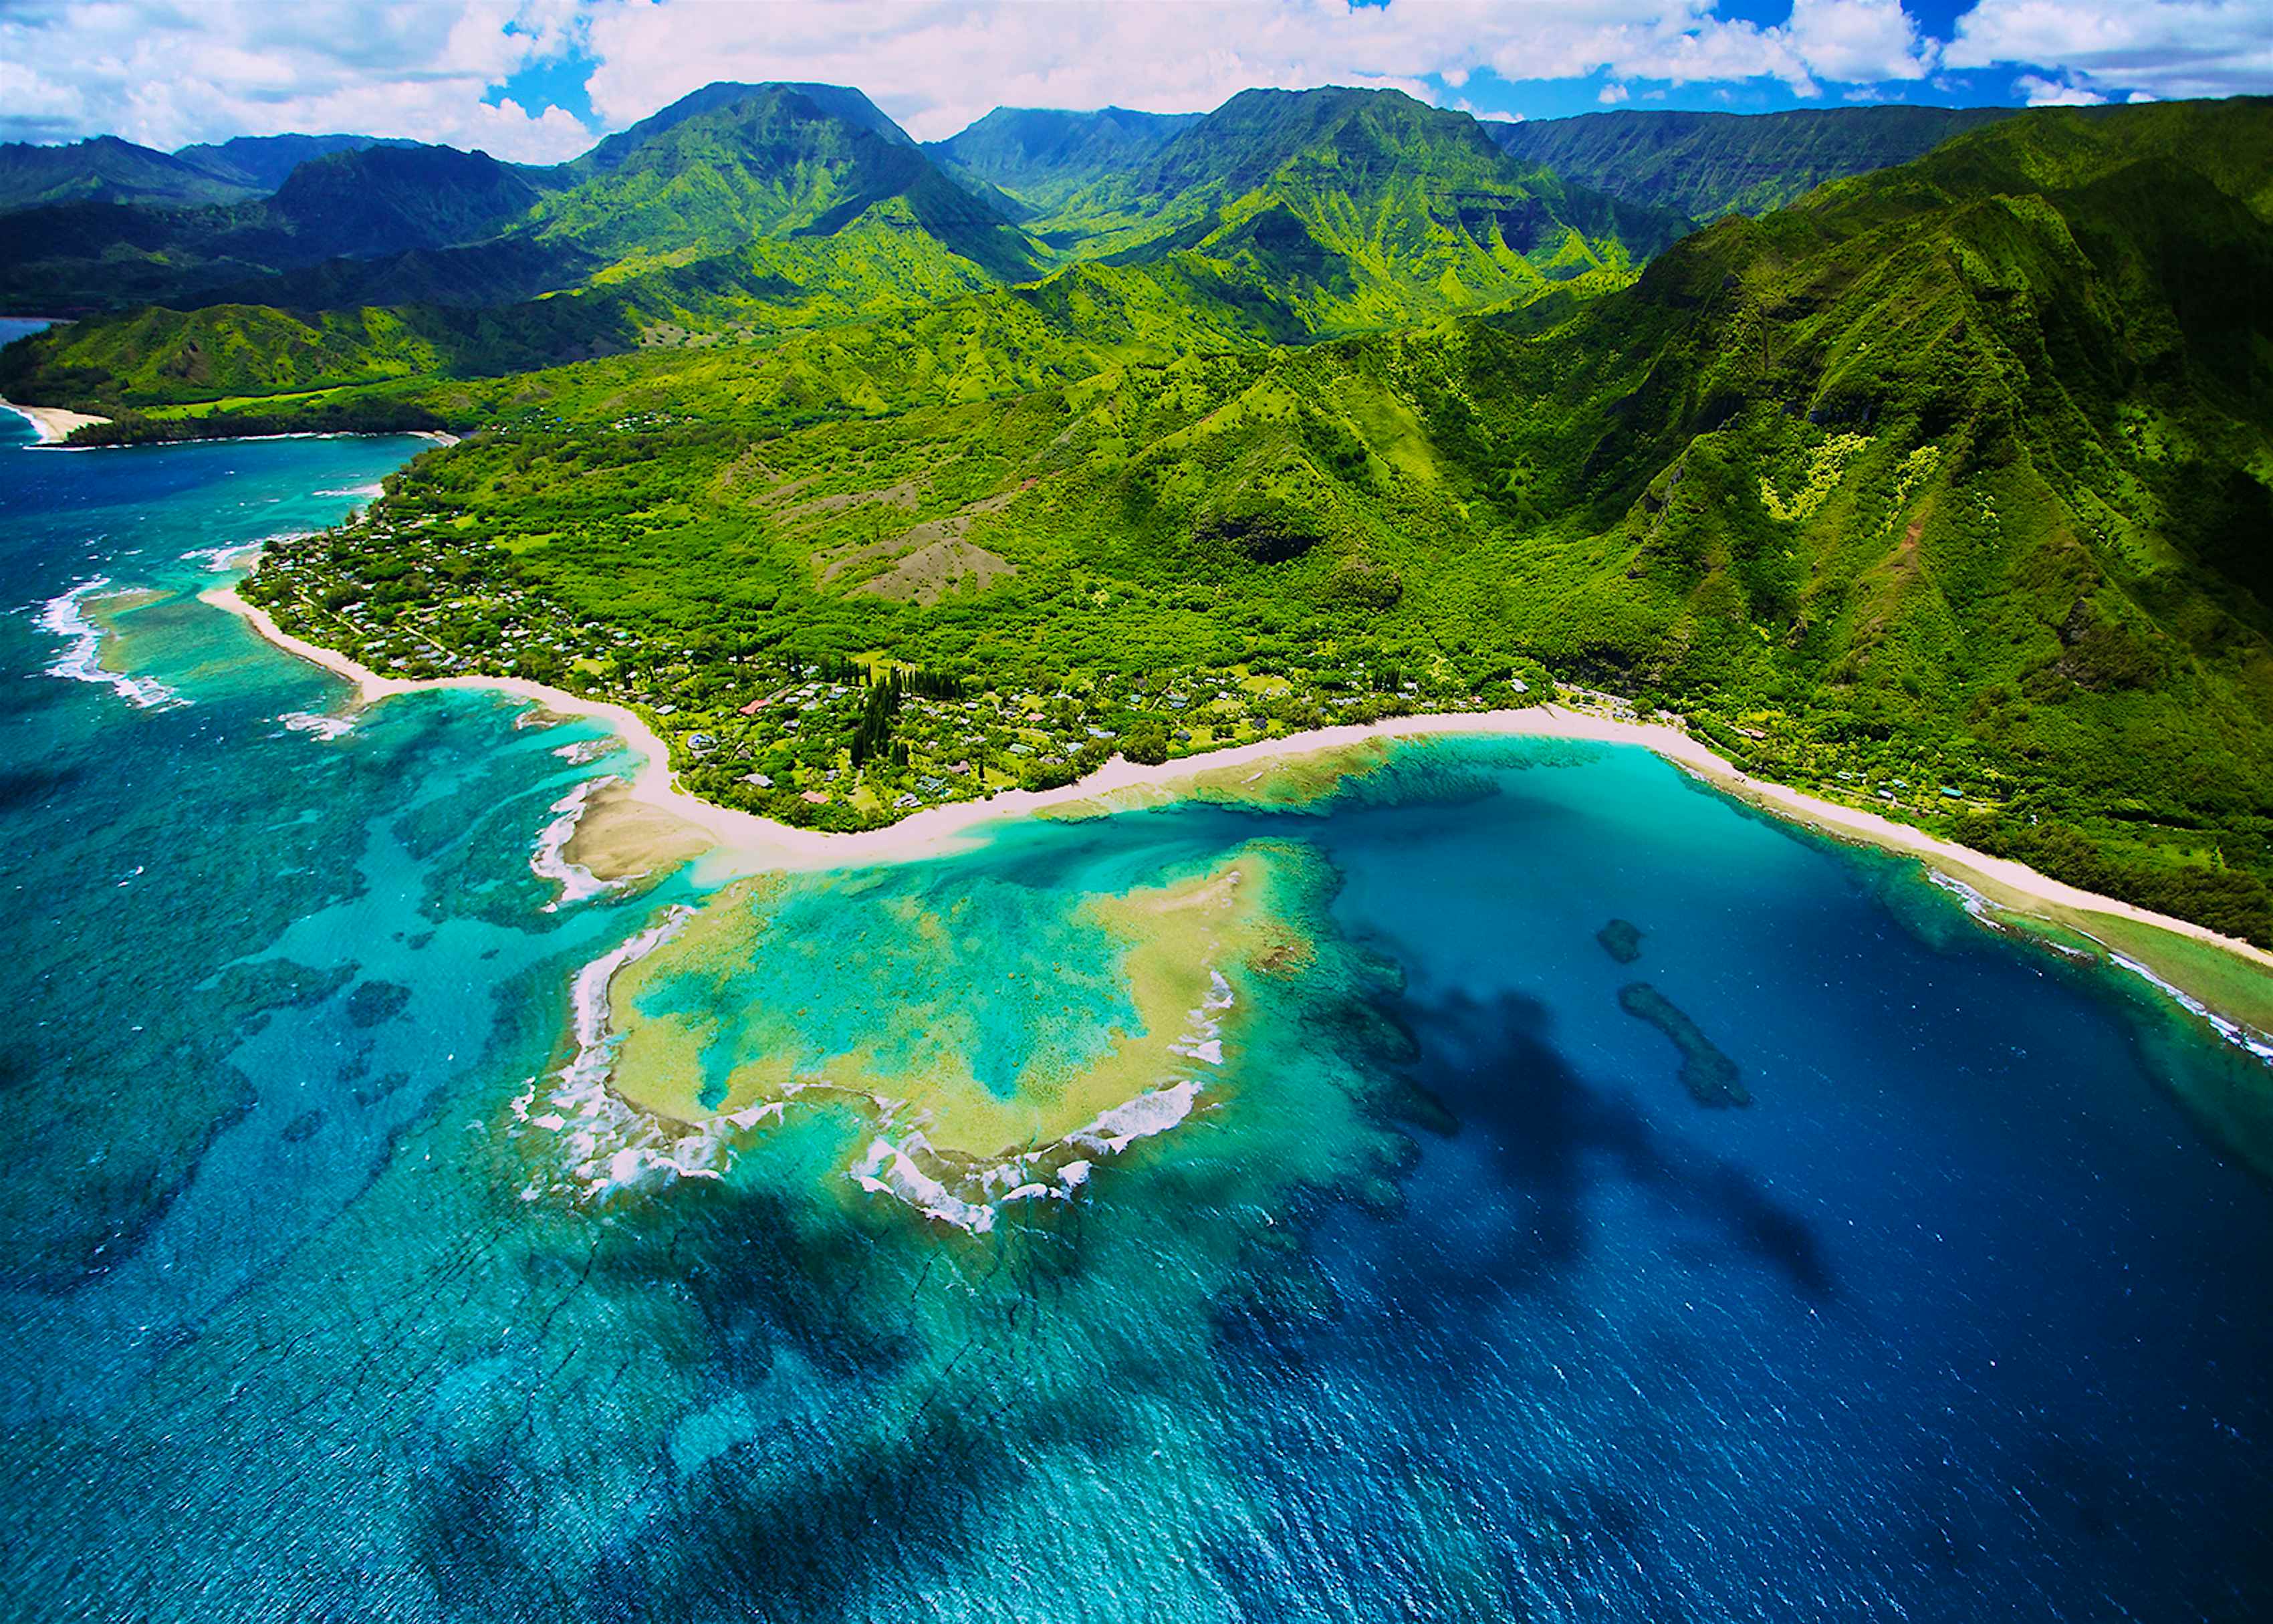 places to visit similar to hawaii